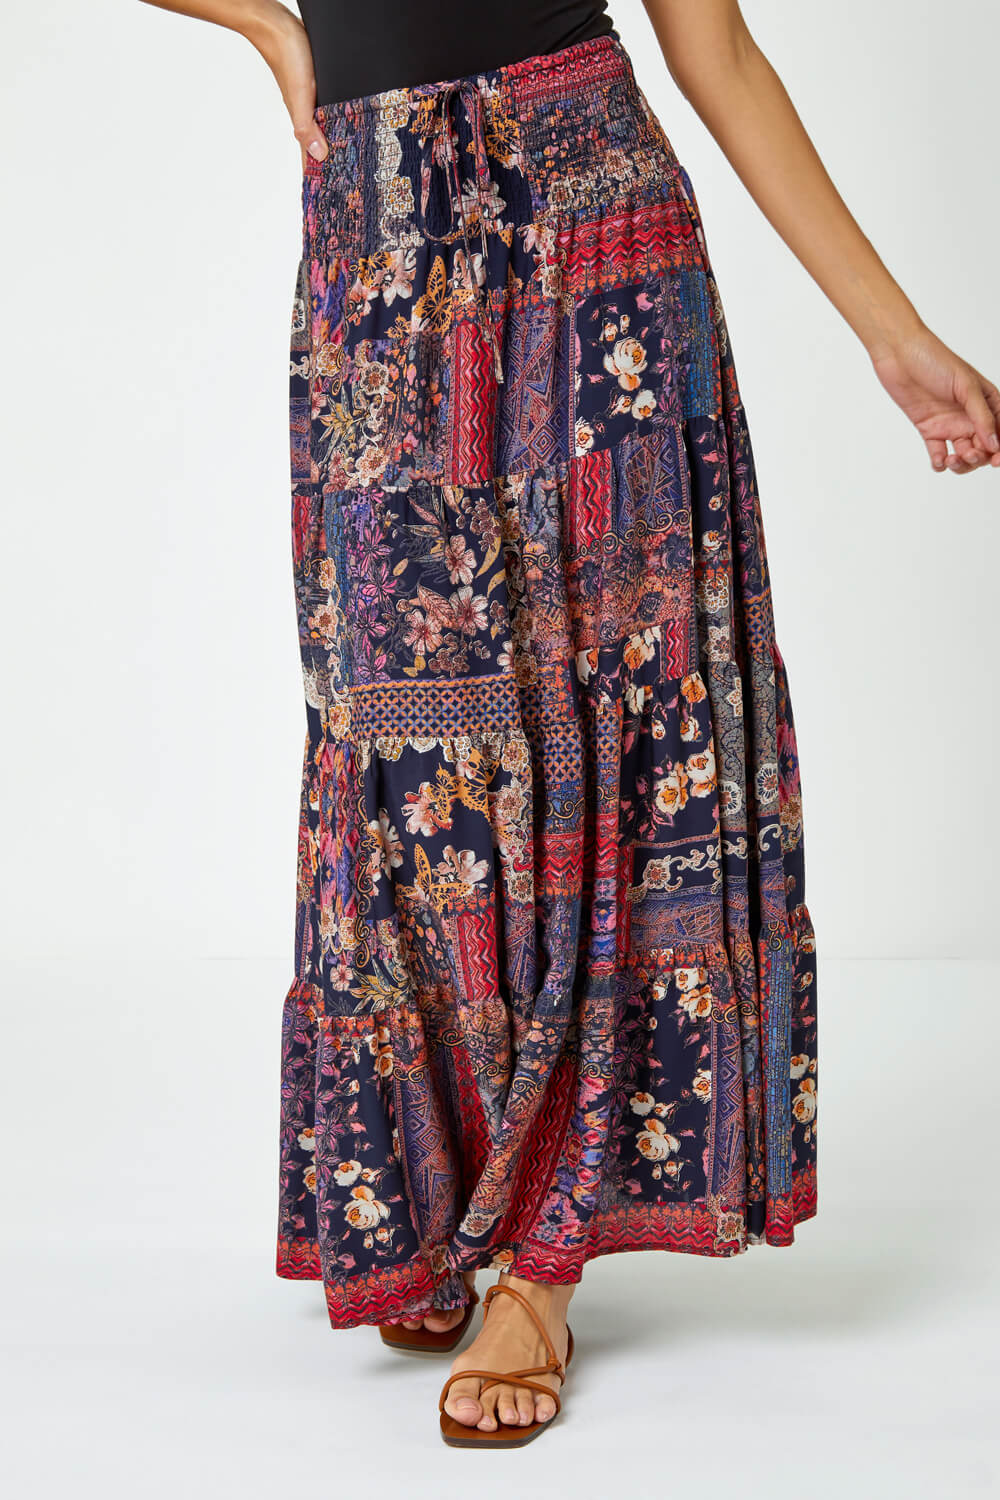 Red Boho Floral Shirred Waist Maxi Skirt, Image 5 of 5